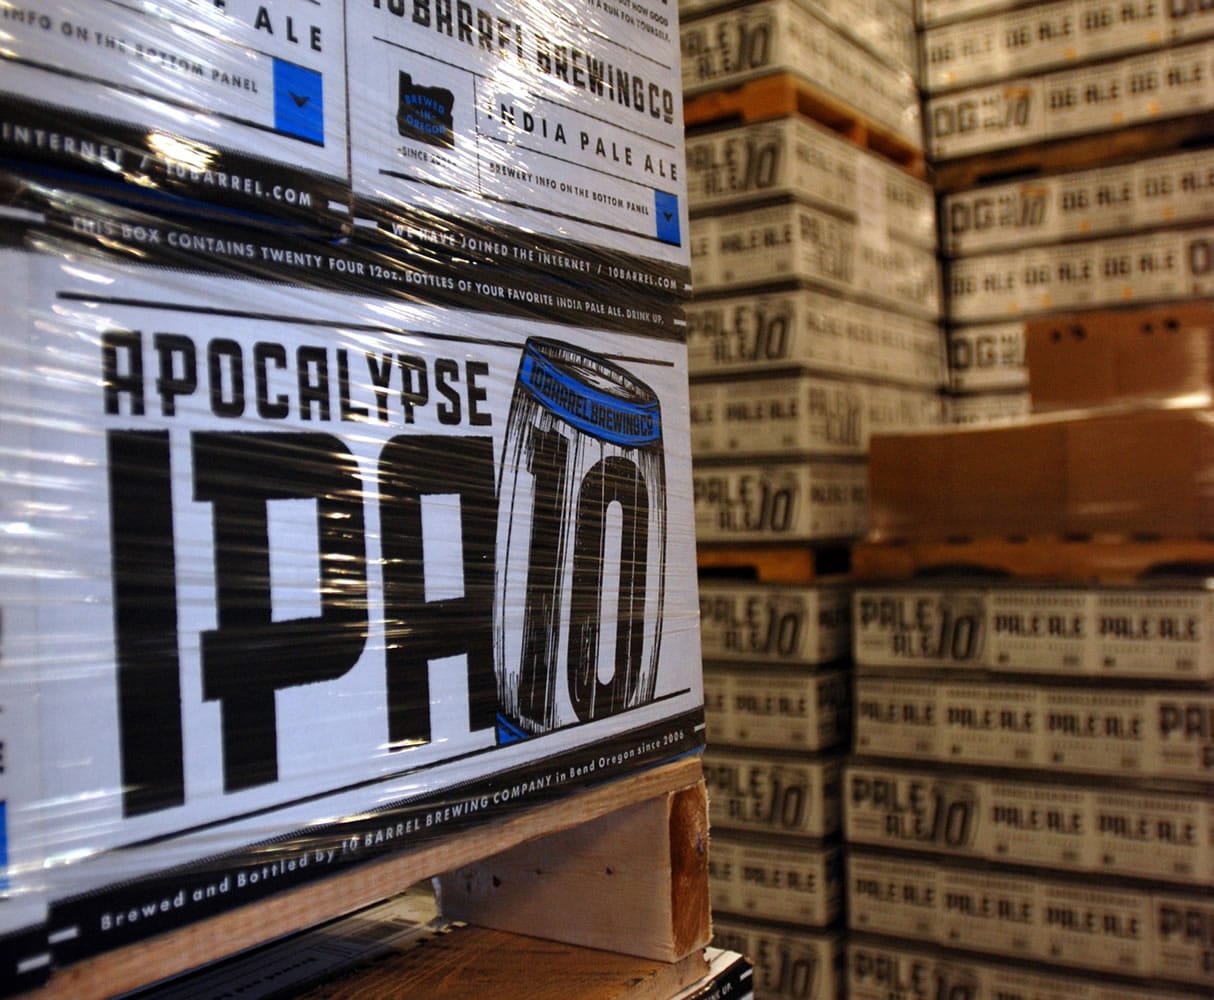 Cases of Apocalypse IPA from 10 Barrel Brewing Co. await shipment in 2014 in Bend, Ore. A year after the Cox brothers sold 10 Barrel to global beer Goliath Anheuser-Busch InBev, the pair are still gainfully employed and 10 Barrel is still producing award-winning beer.